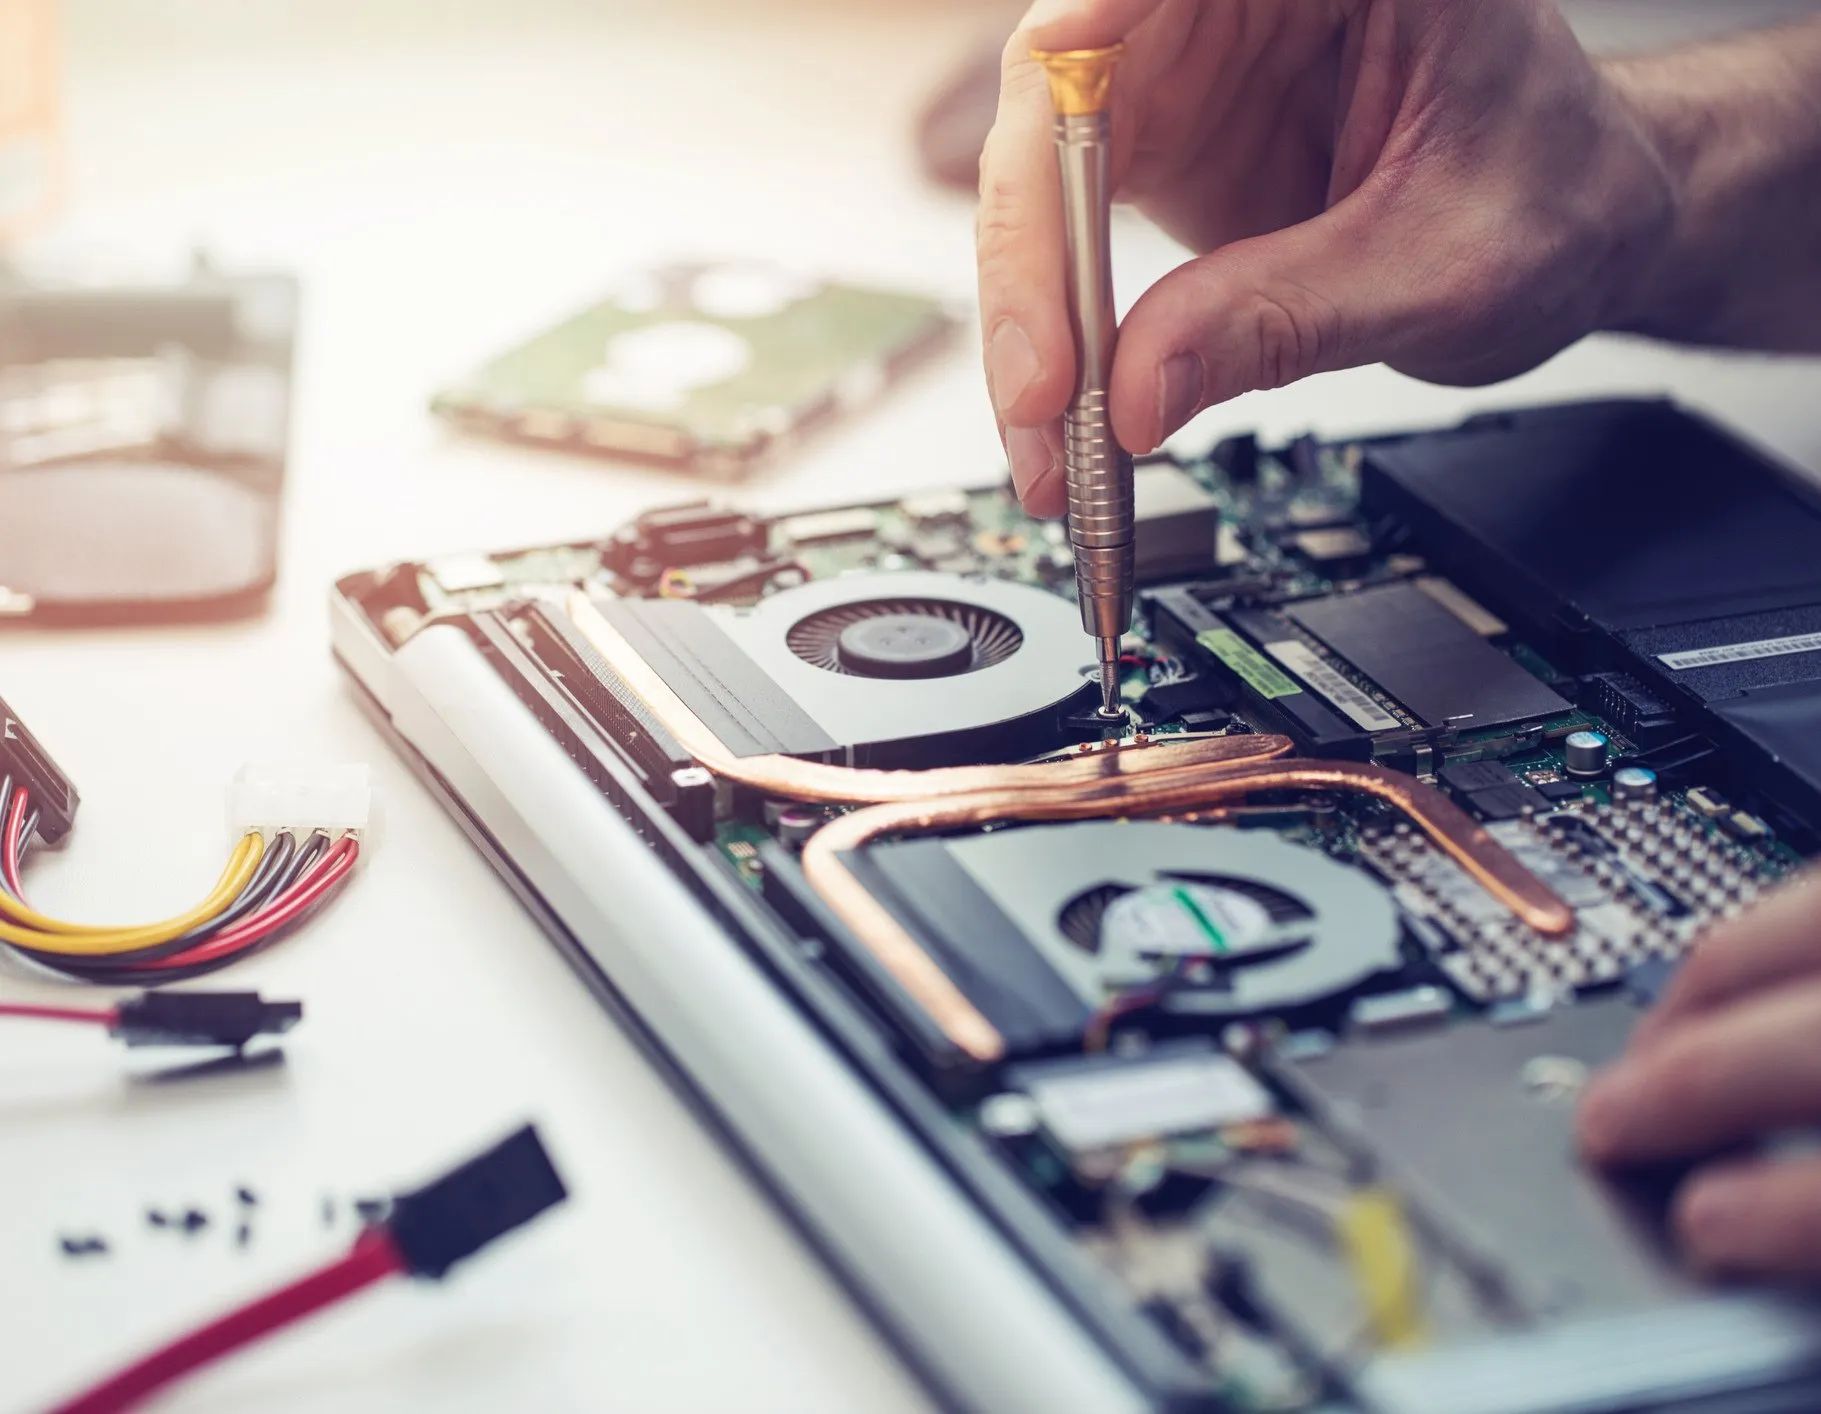 Computer Repairs — IT Support in Taree, NSW